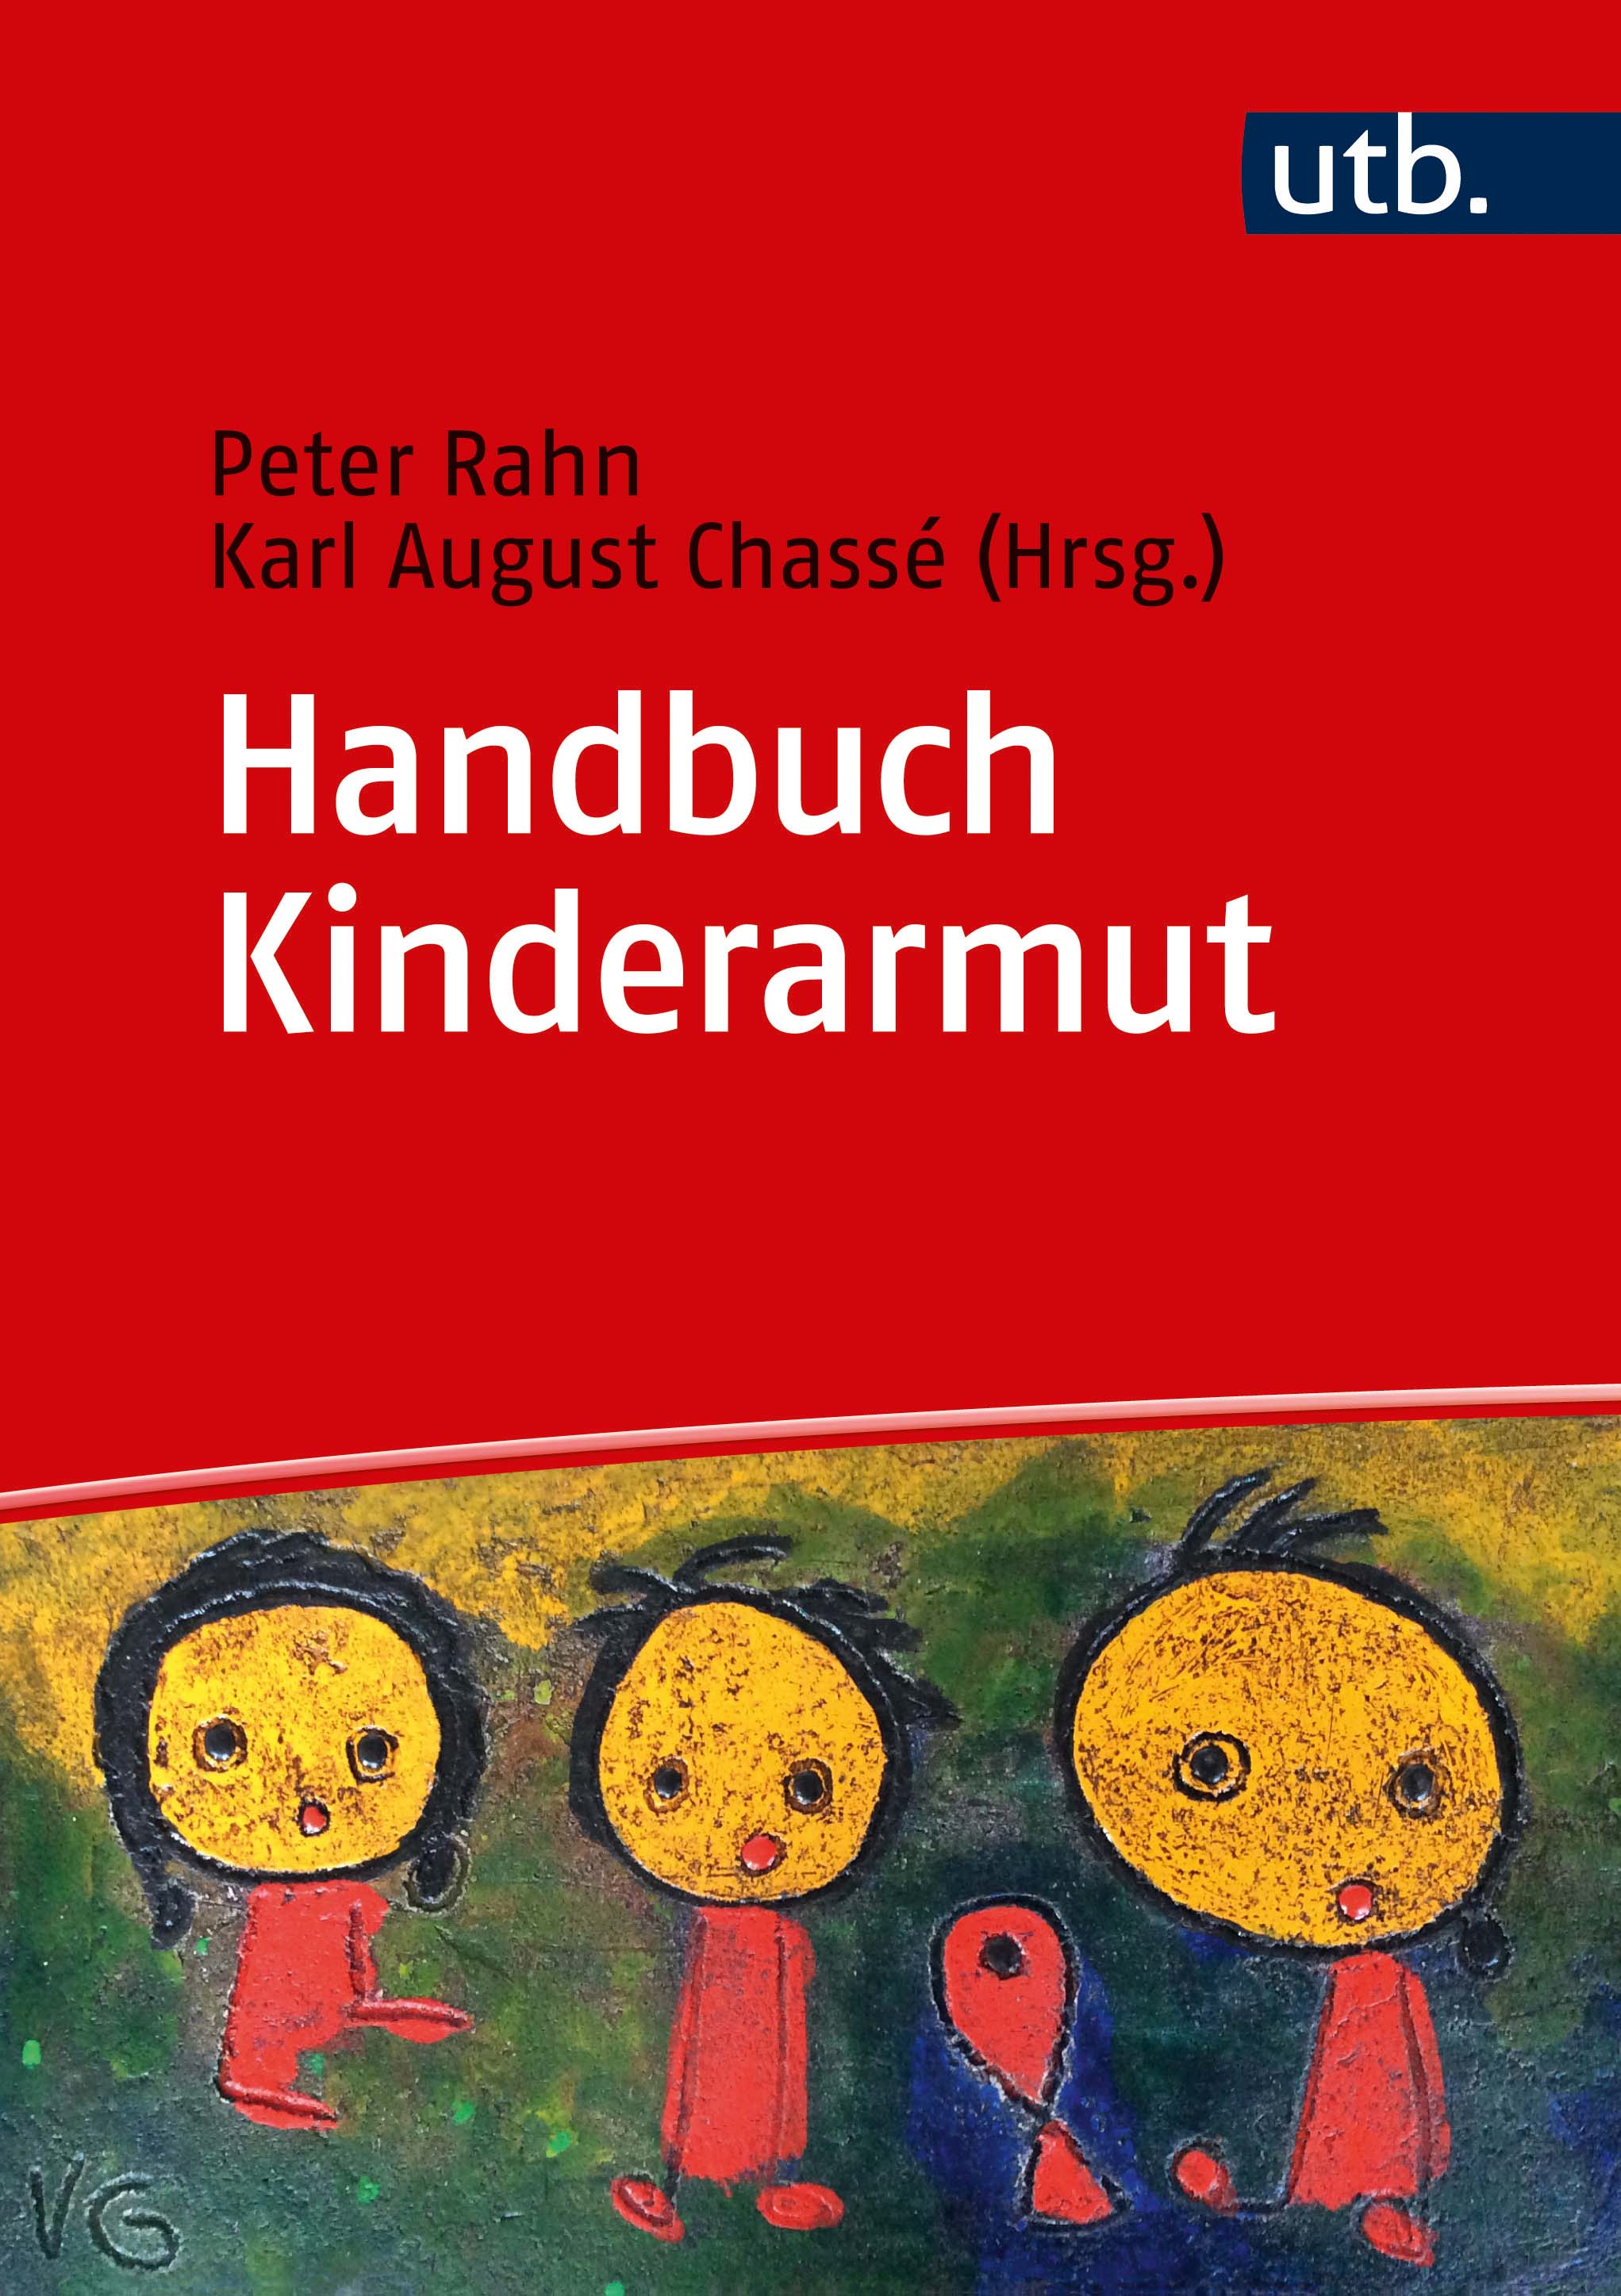 Cover of the "Handbook on Child Poverty" published in 2020 (Image: Verlag Barbara Budrich/utb)